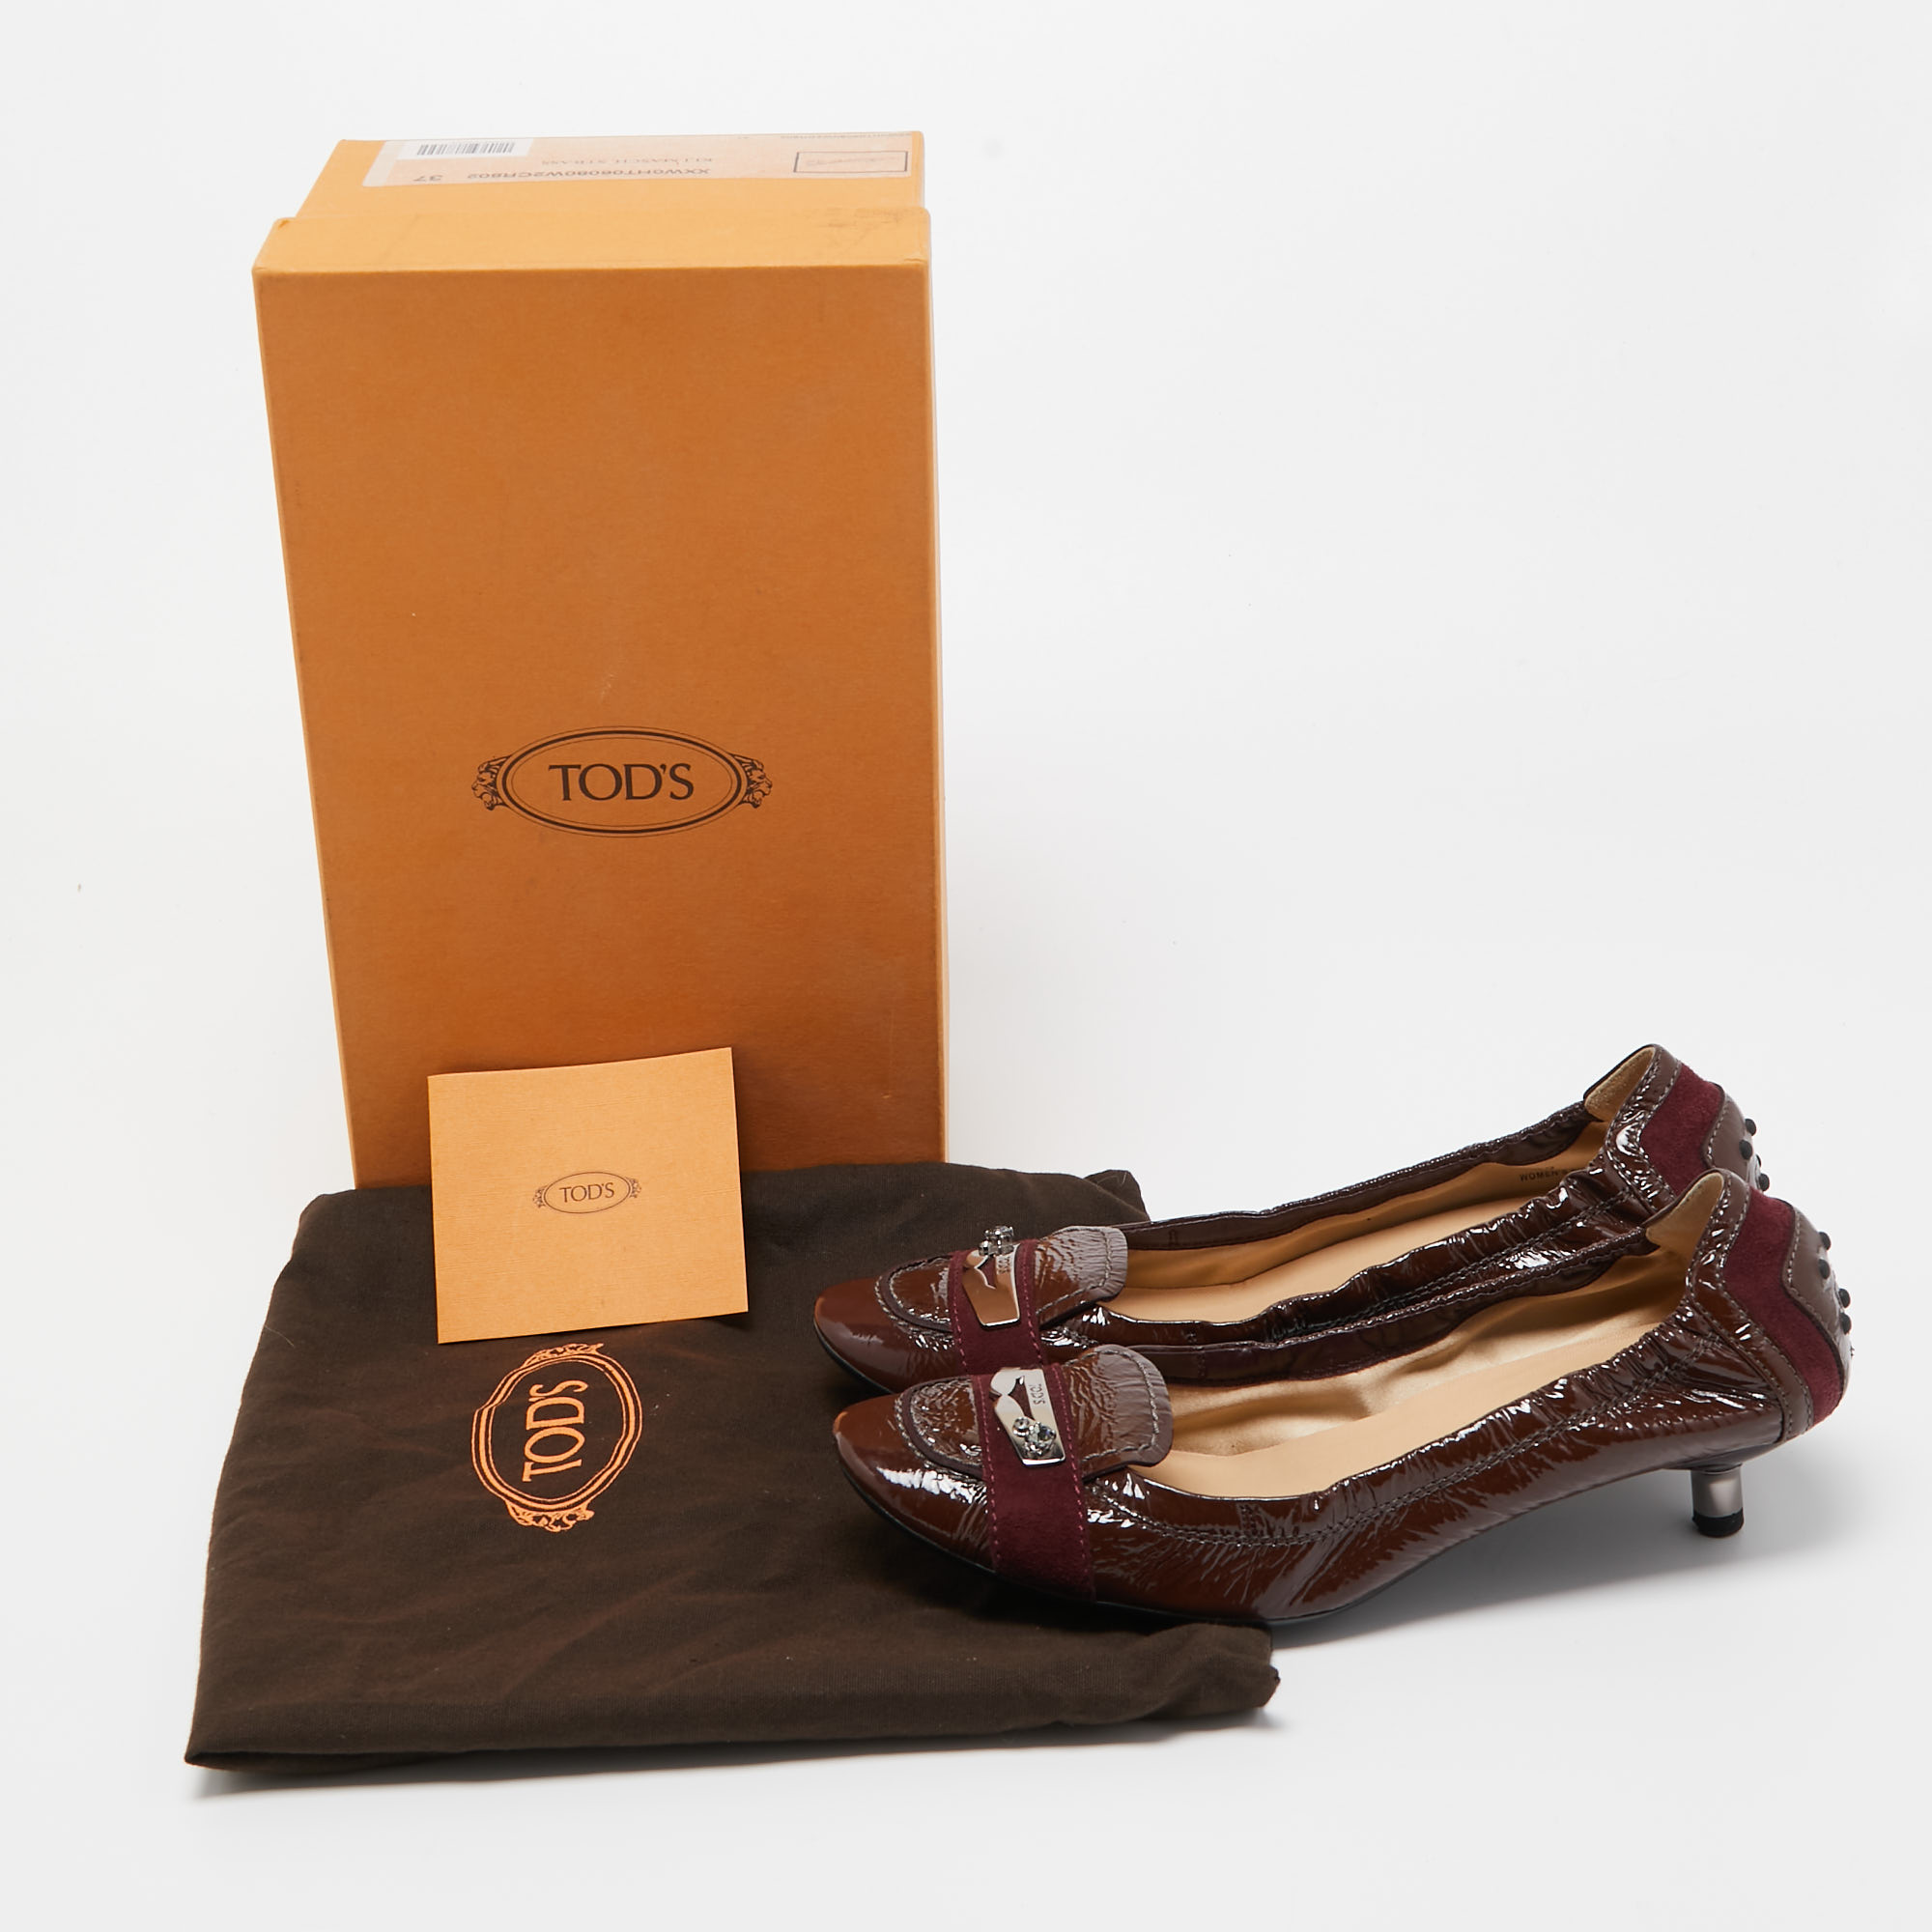 Tod's Brown/Burgundy Patent Leather And Suede Scrunch Loafer Pumps Size 37